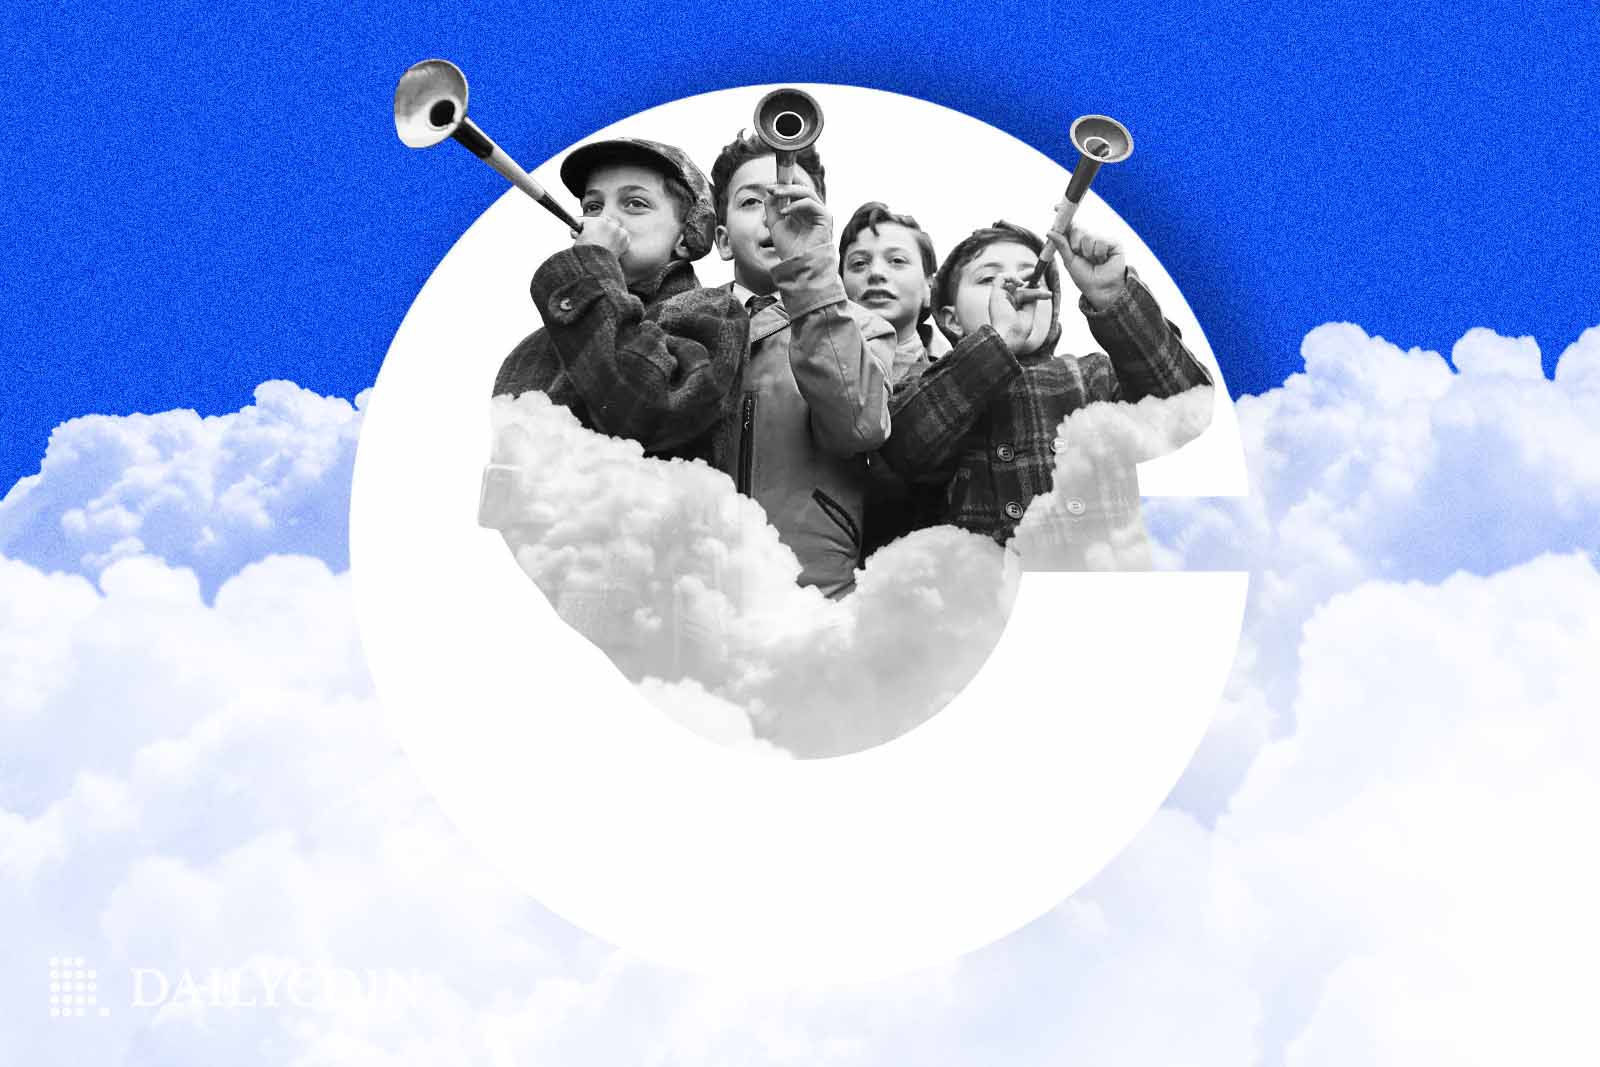 Kids with trumpets above the clouds performing in front of Coinbase logo.